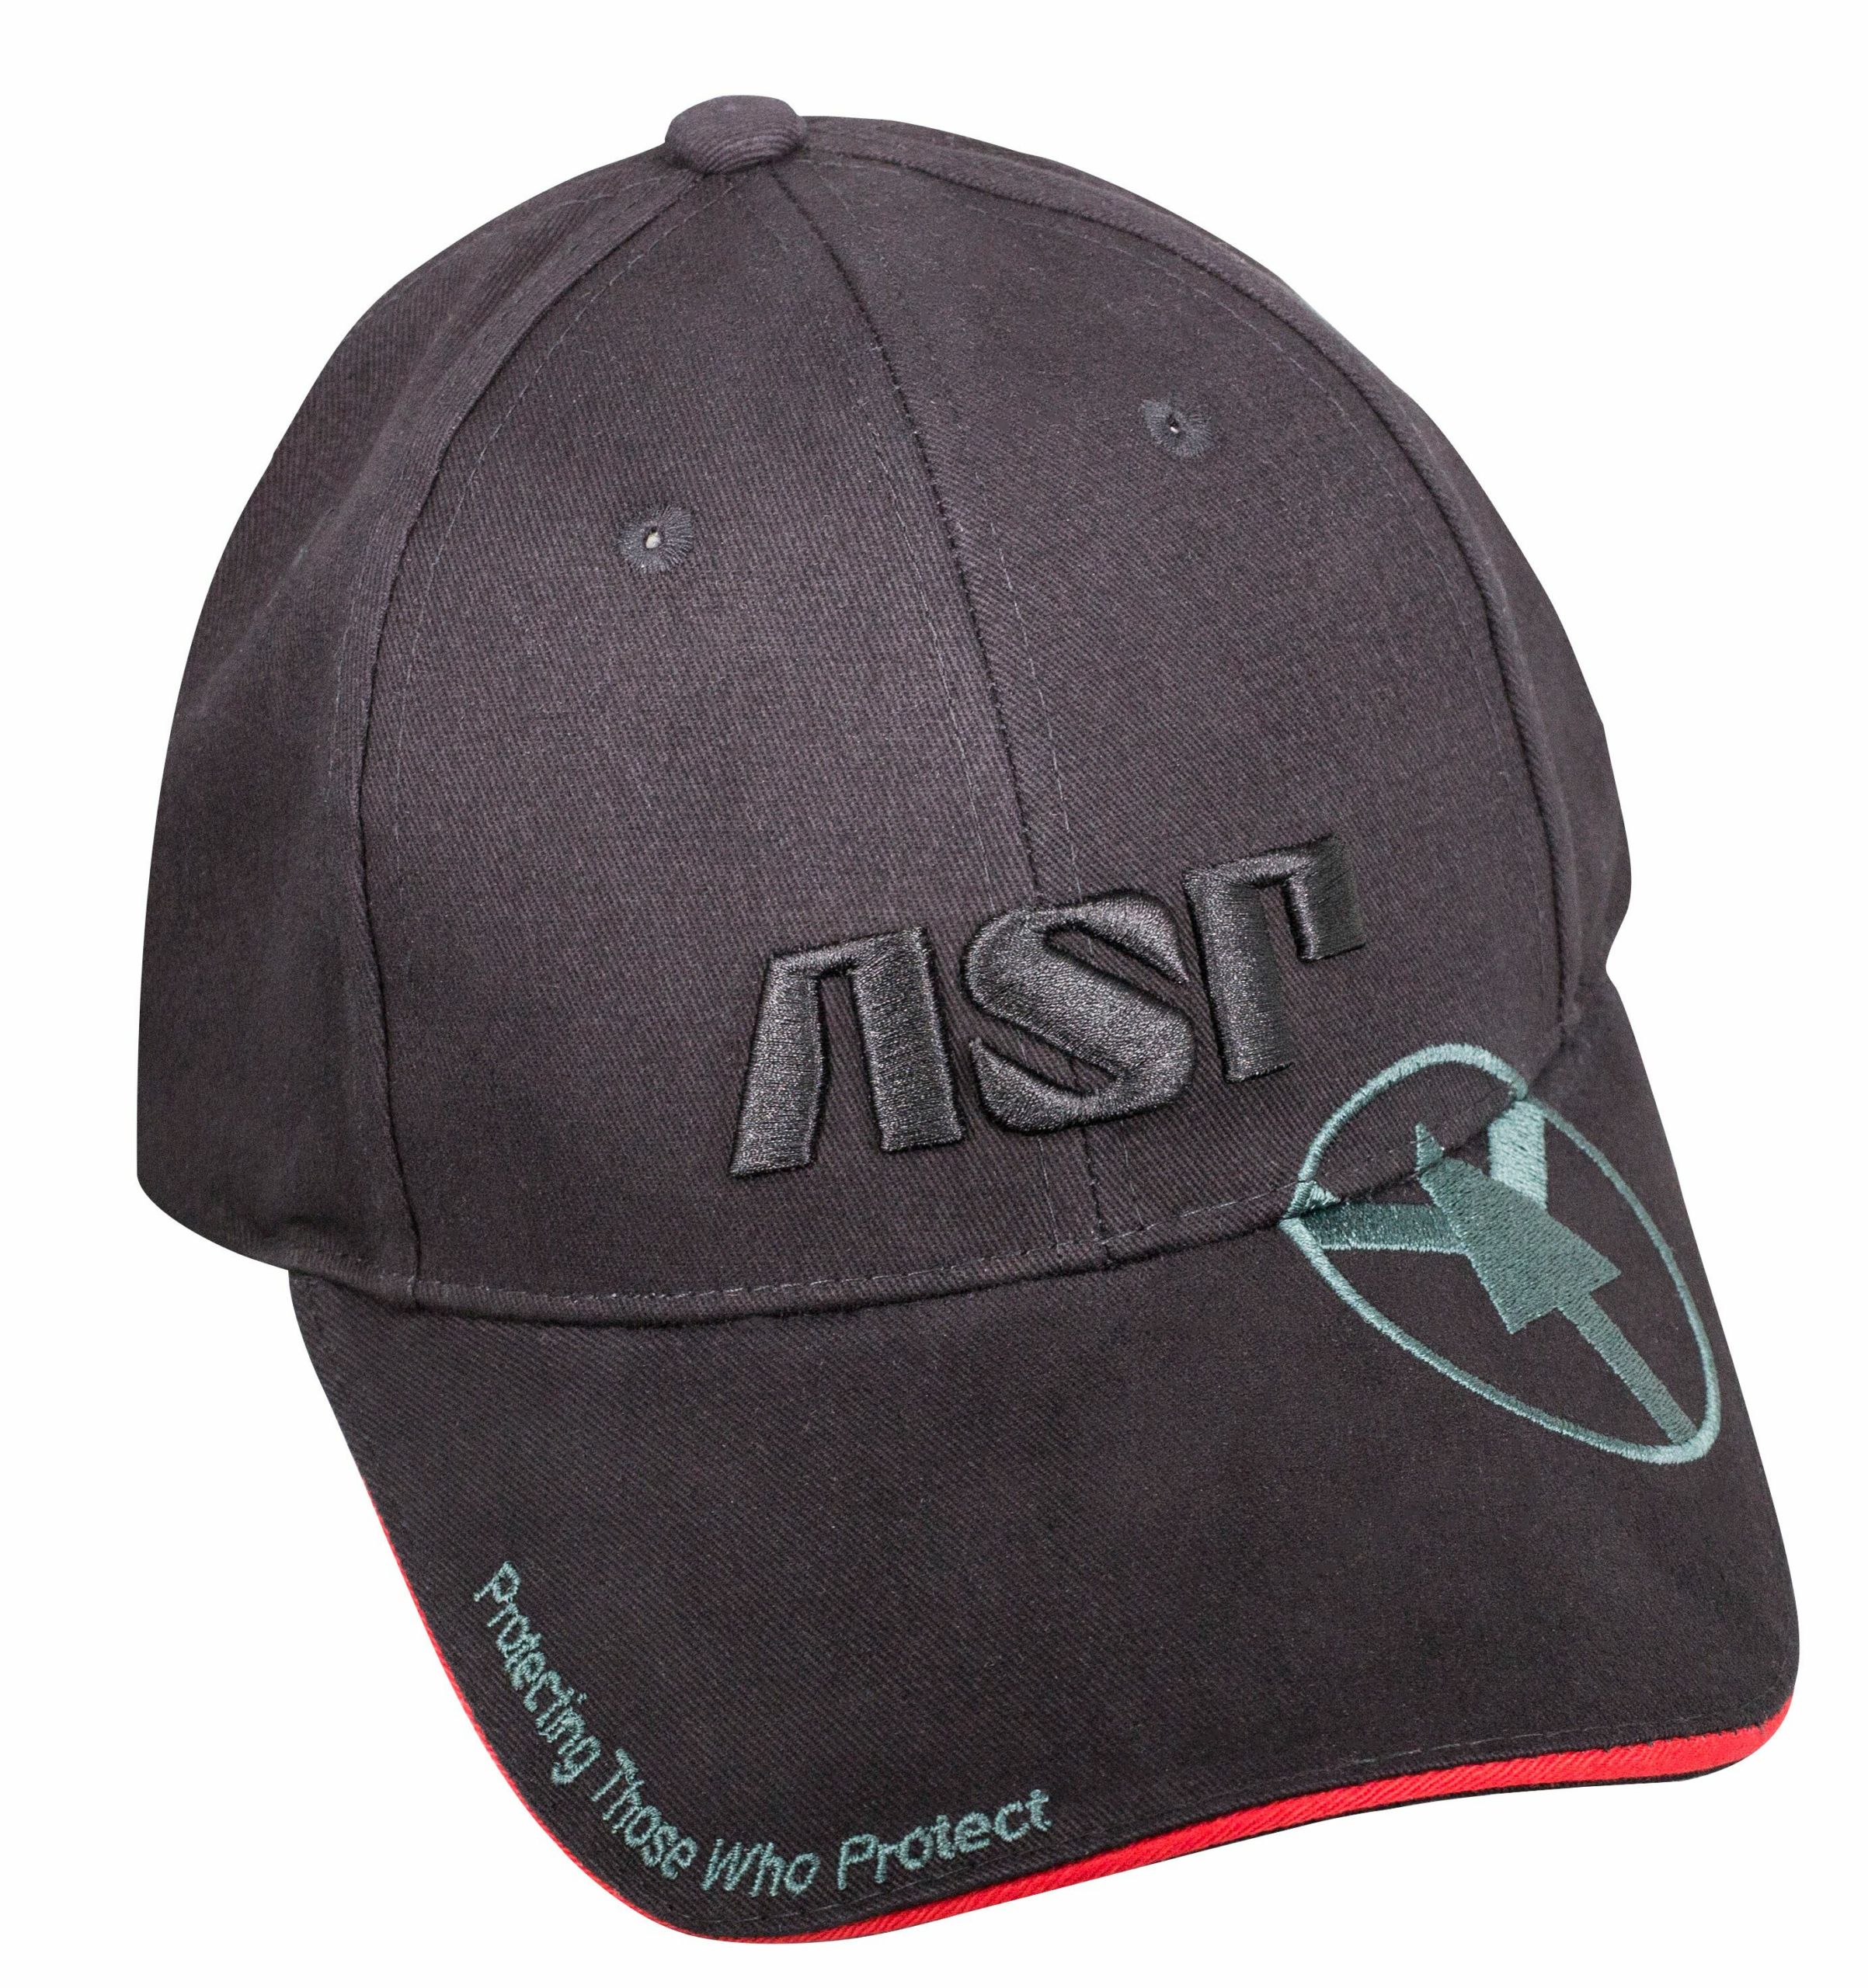 ASP Hat - Clothing & Accessories